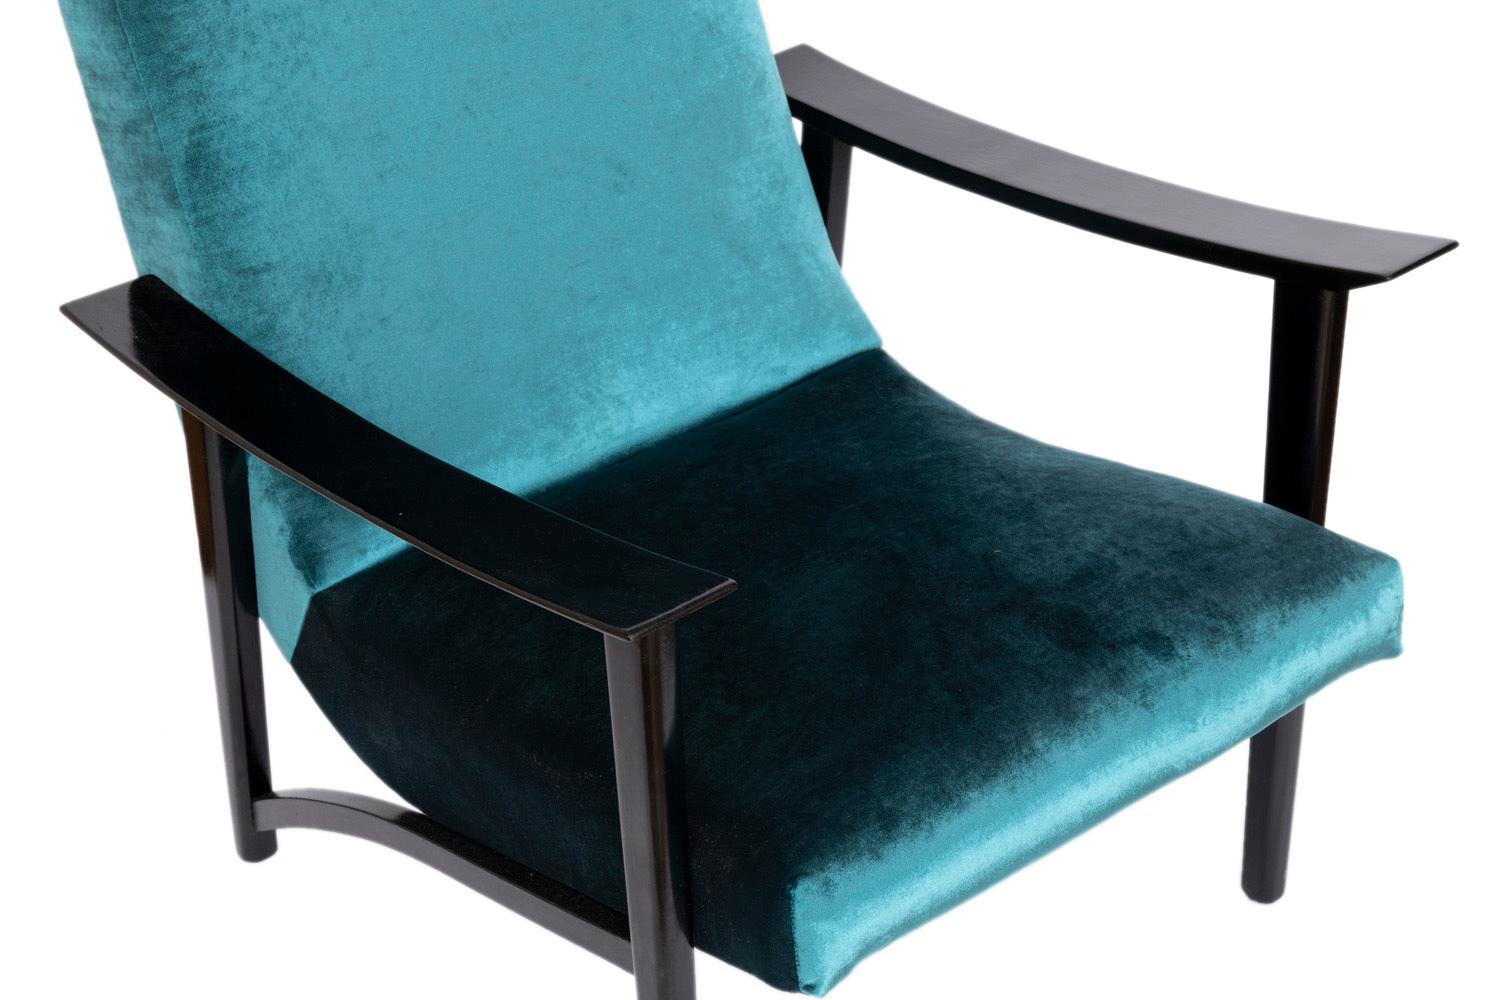 Pair of armchairs in black lacquered wood and blue velvet. Slightly curved armrests supported by cone-shaped legs. Curved stretcher bars link legs on armchairs each side.

Scandinavian work in the style of Arne Hovmand Olsen, realized in